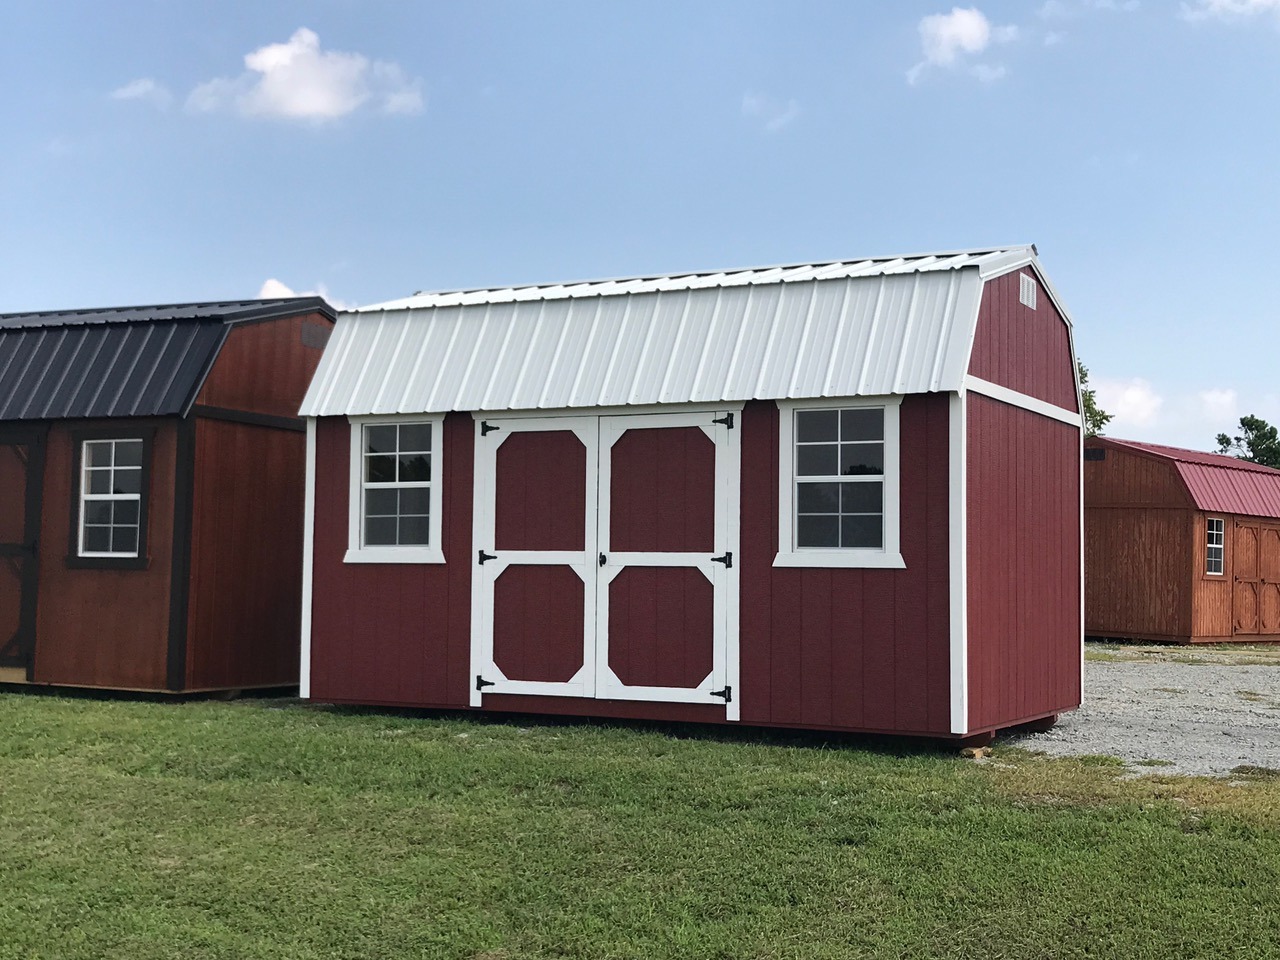 Painted express series side lofted barn